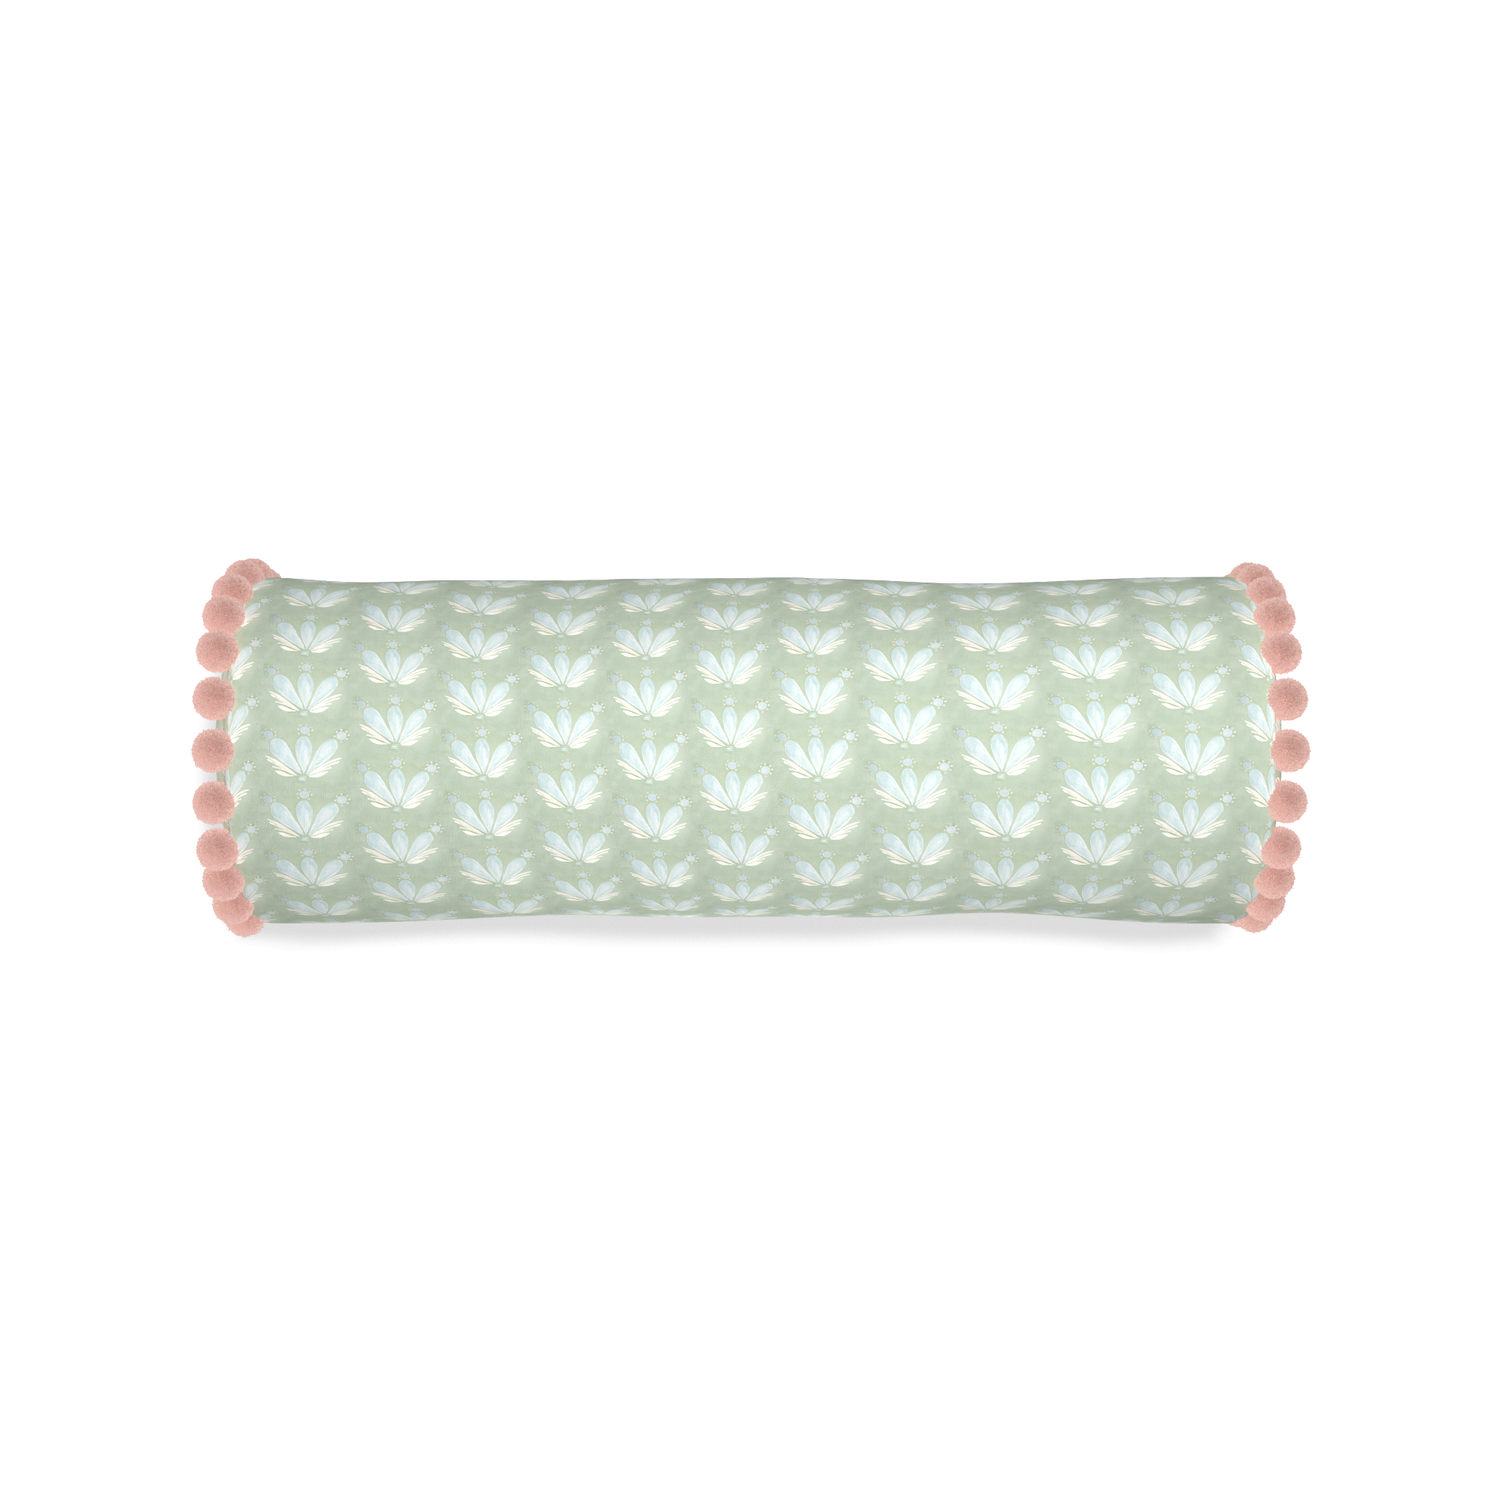 Bolster serena sea salt custom blue & green floral drop repeatpillow with rose pom pom on white background